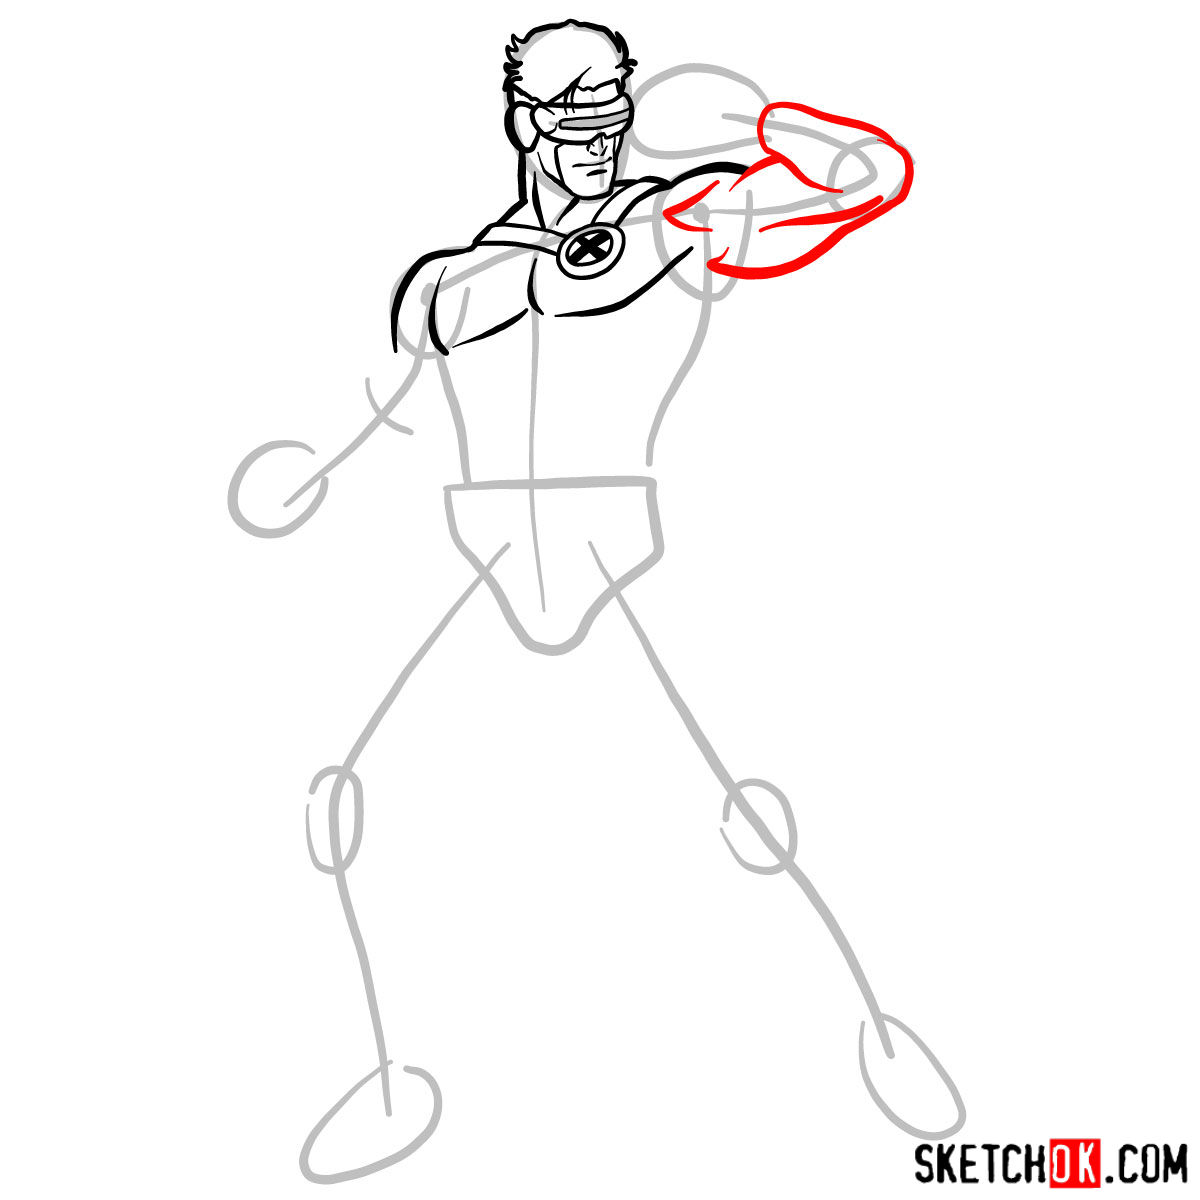 How to draw Cyclops from X-Men - step 08